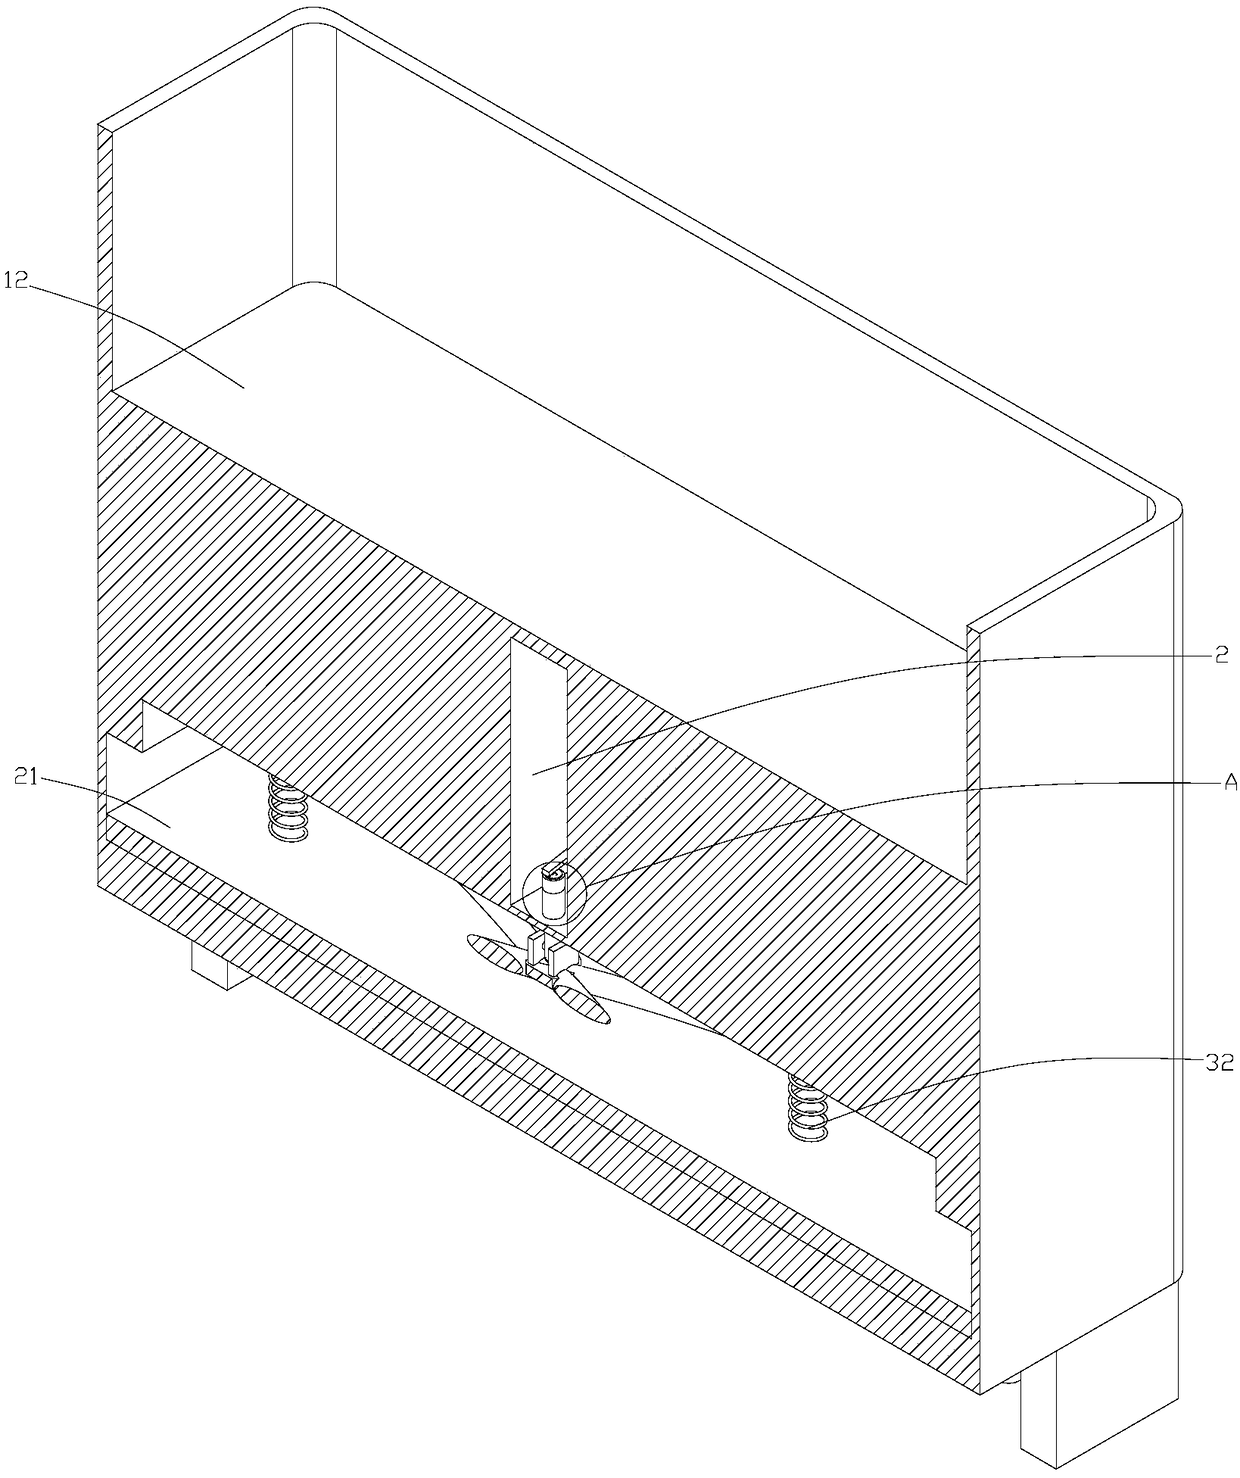 Movable planting box for garden engineering